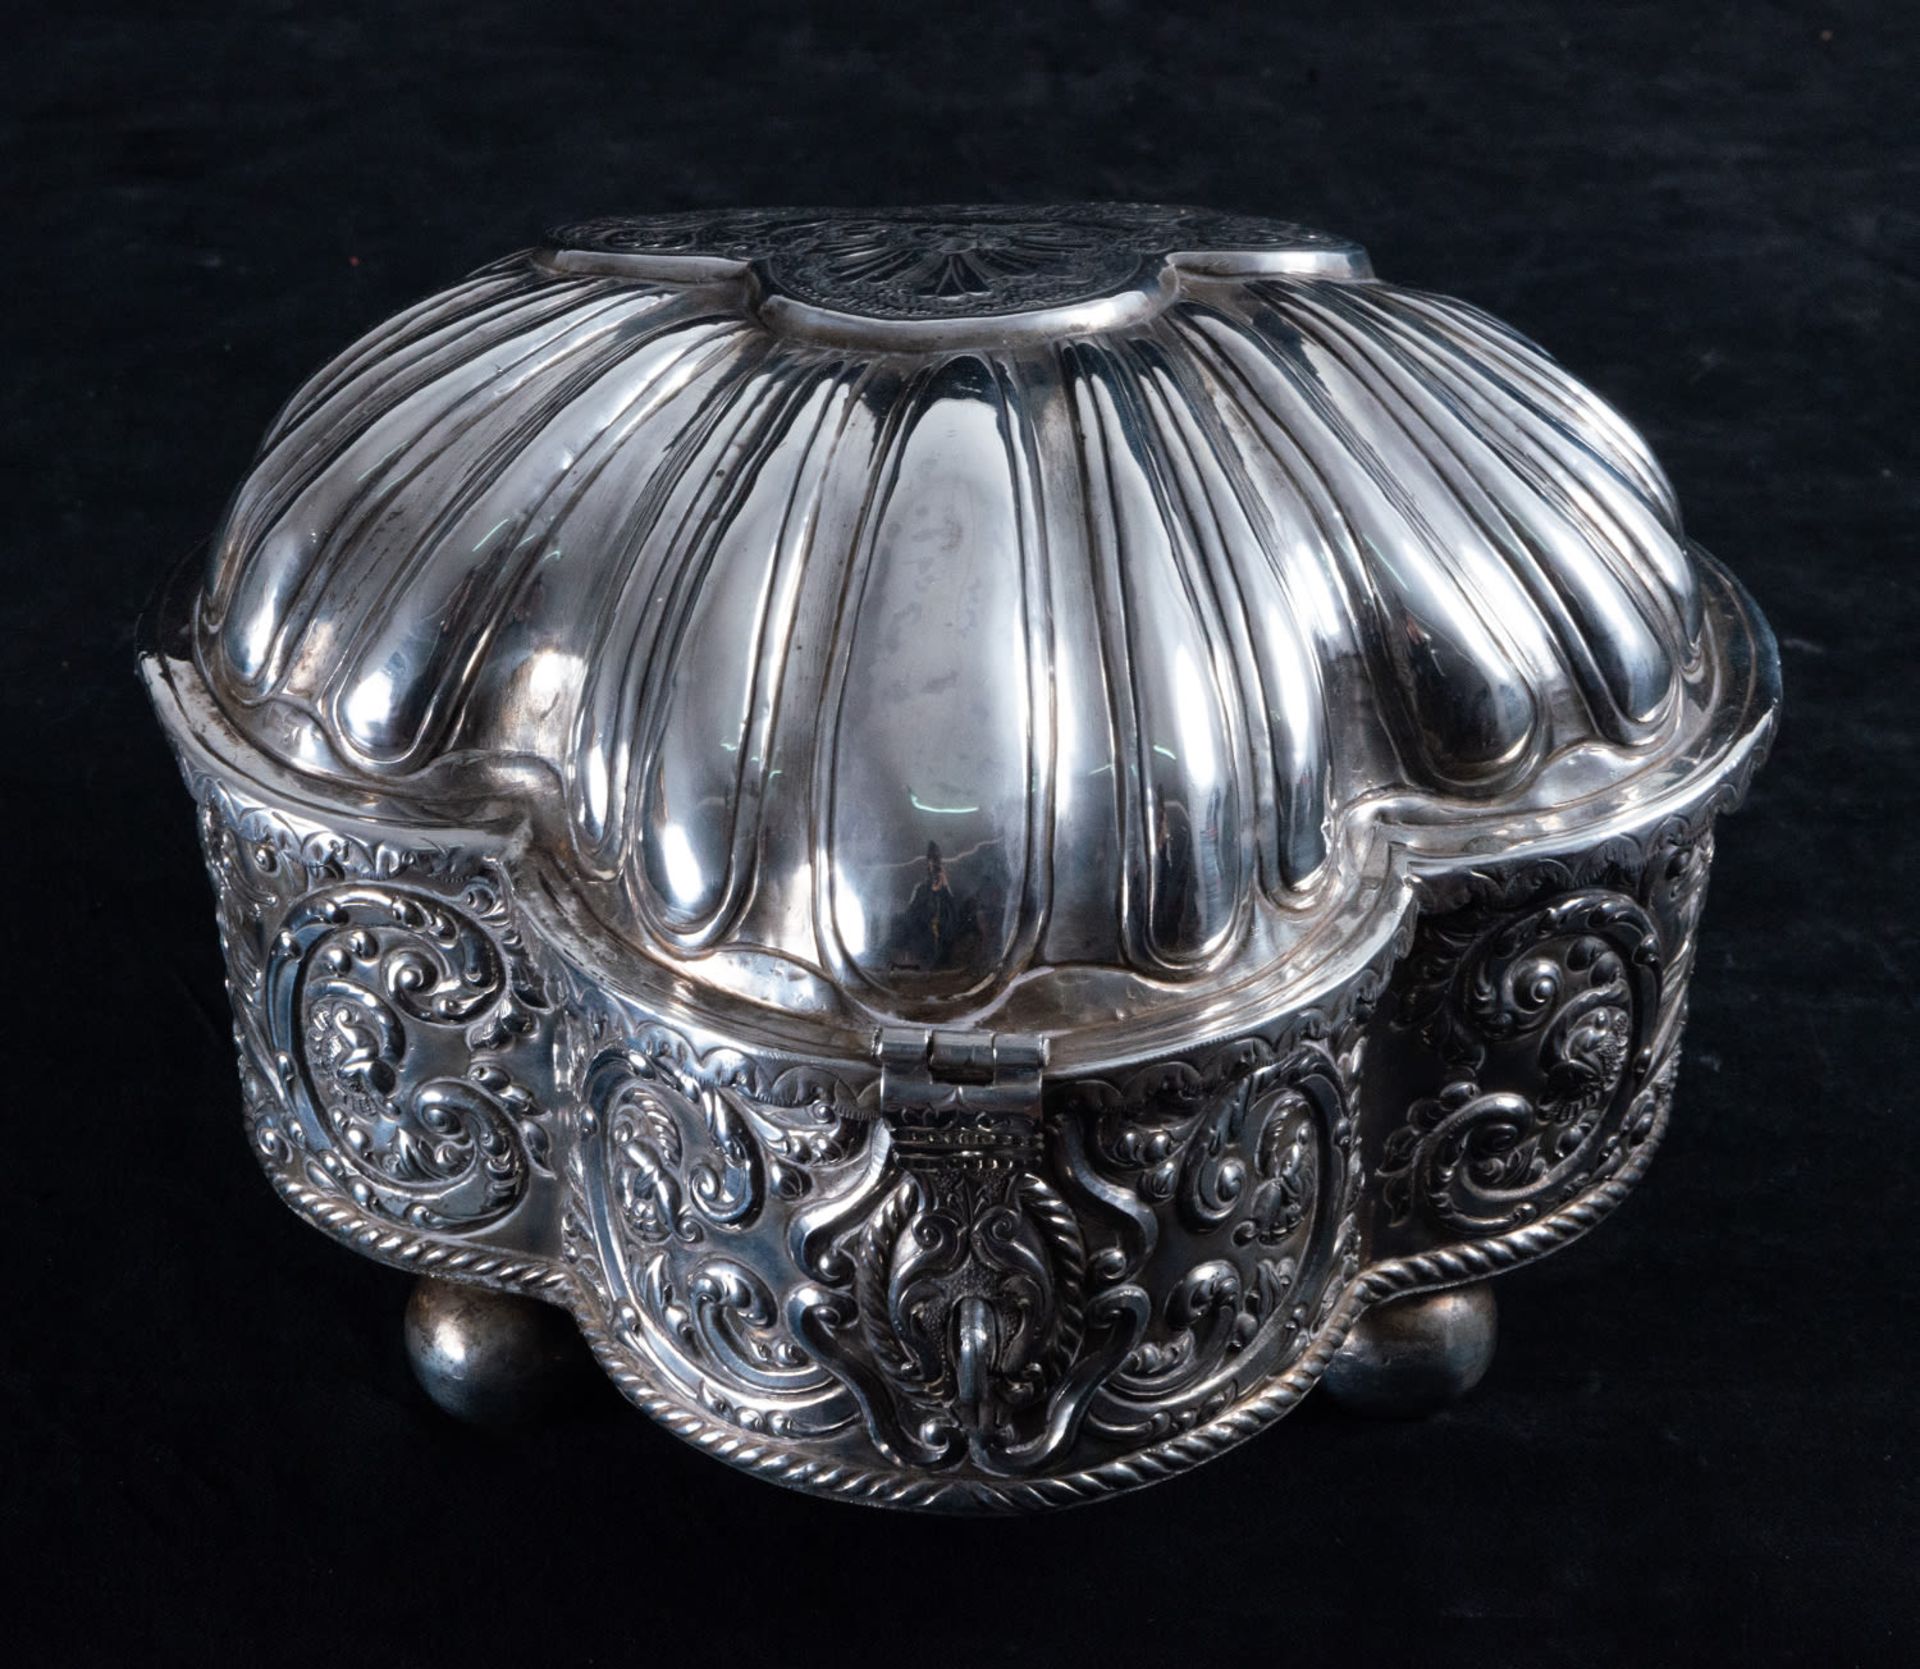 Exceptional Coquera in silver, colonial work, Cuzco, Peru, 18th century - Image 2 of 8